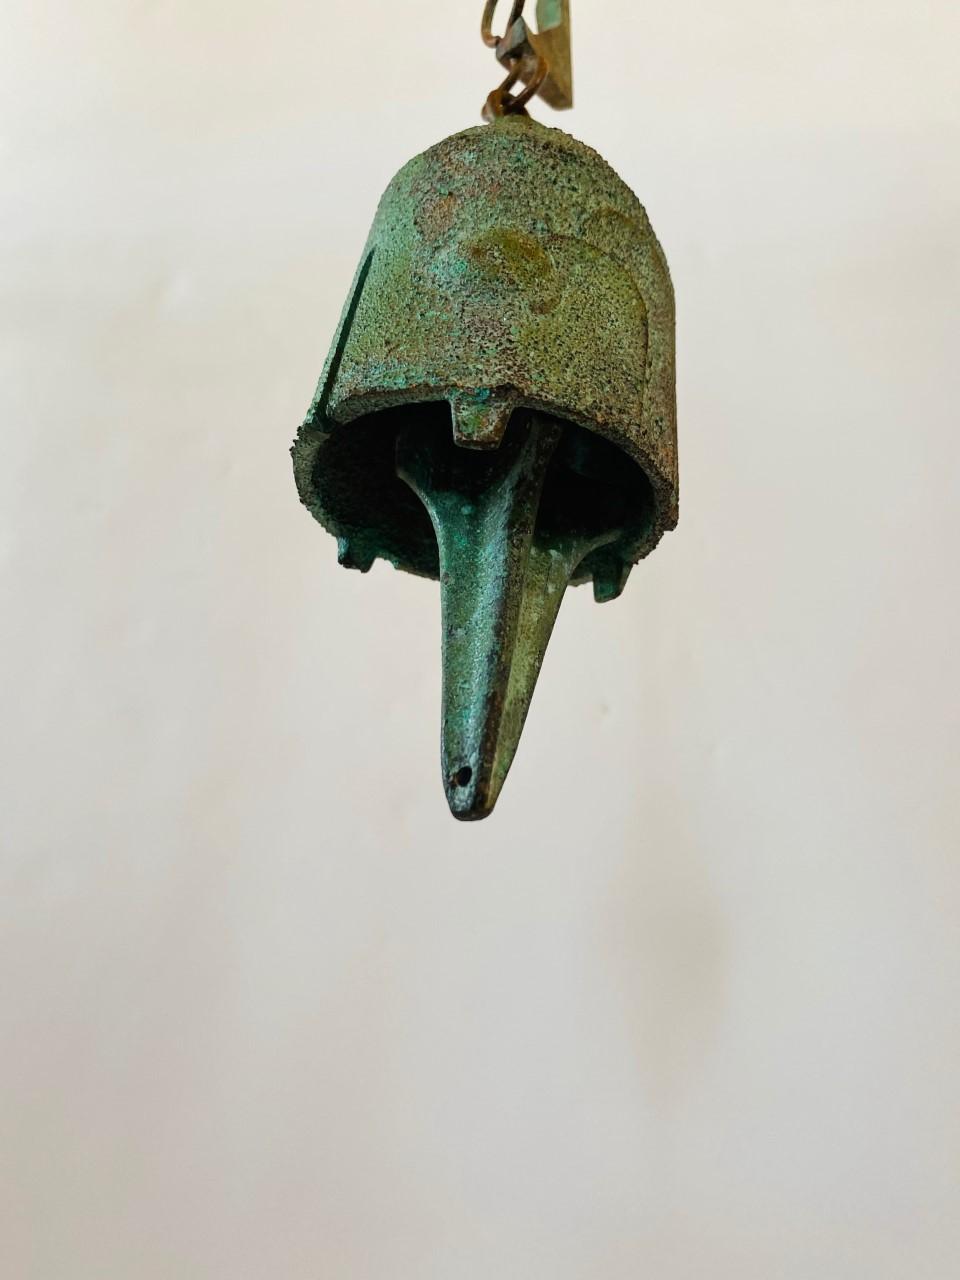 North American Beautiful Vintage Bronze Bell by Paolo Soleri